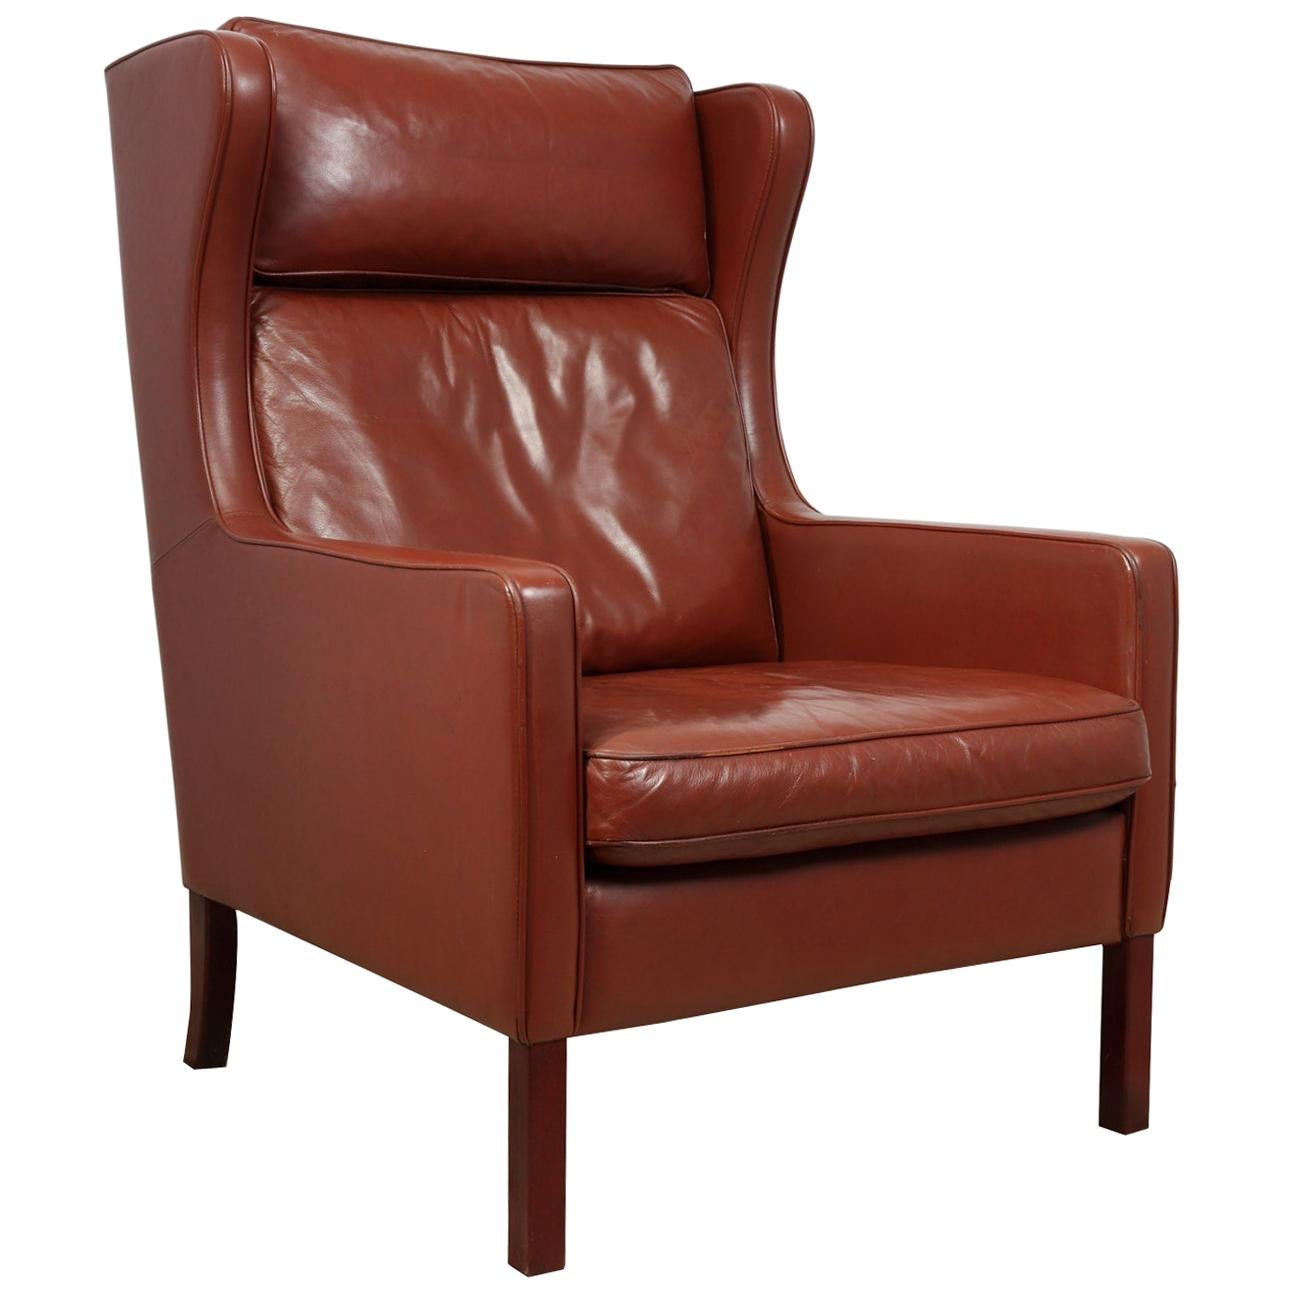 Midcentury Danish Leather Wing Chair by Stouby, circa 1970